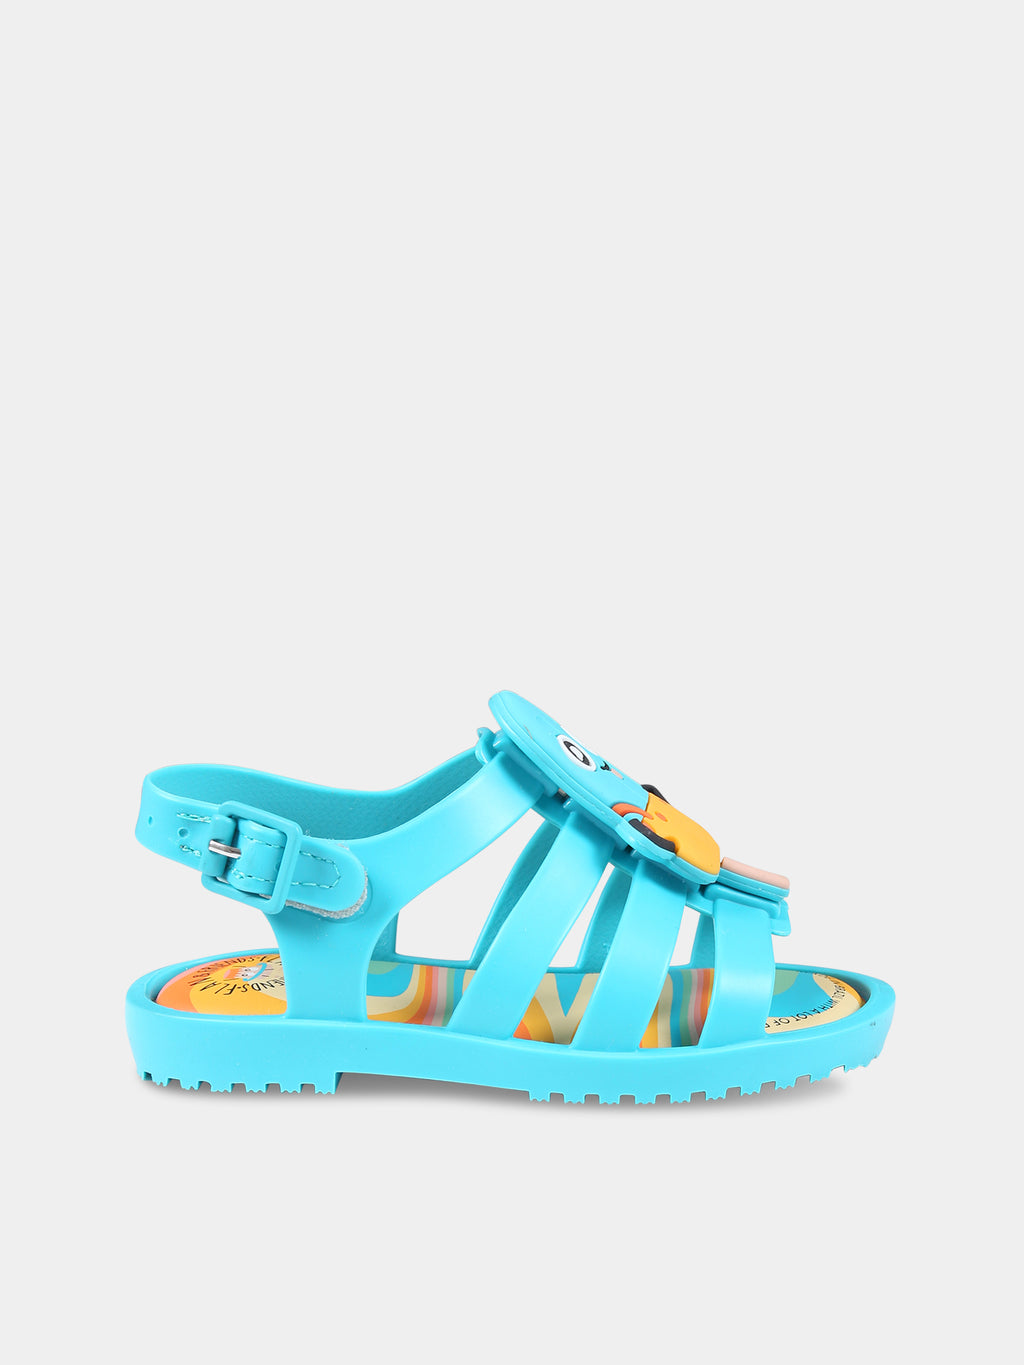 Light blue sandals for kids with cactus and popsicle